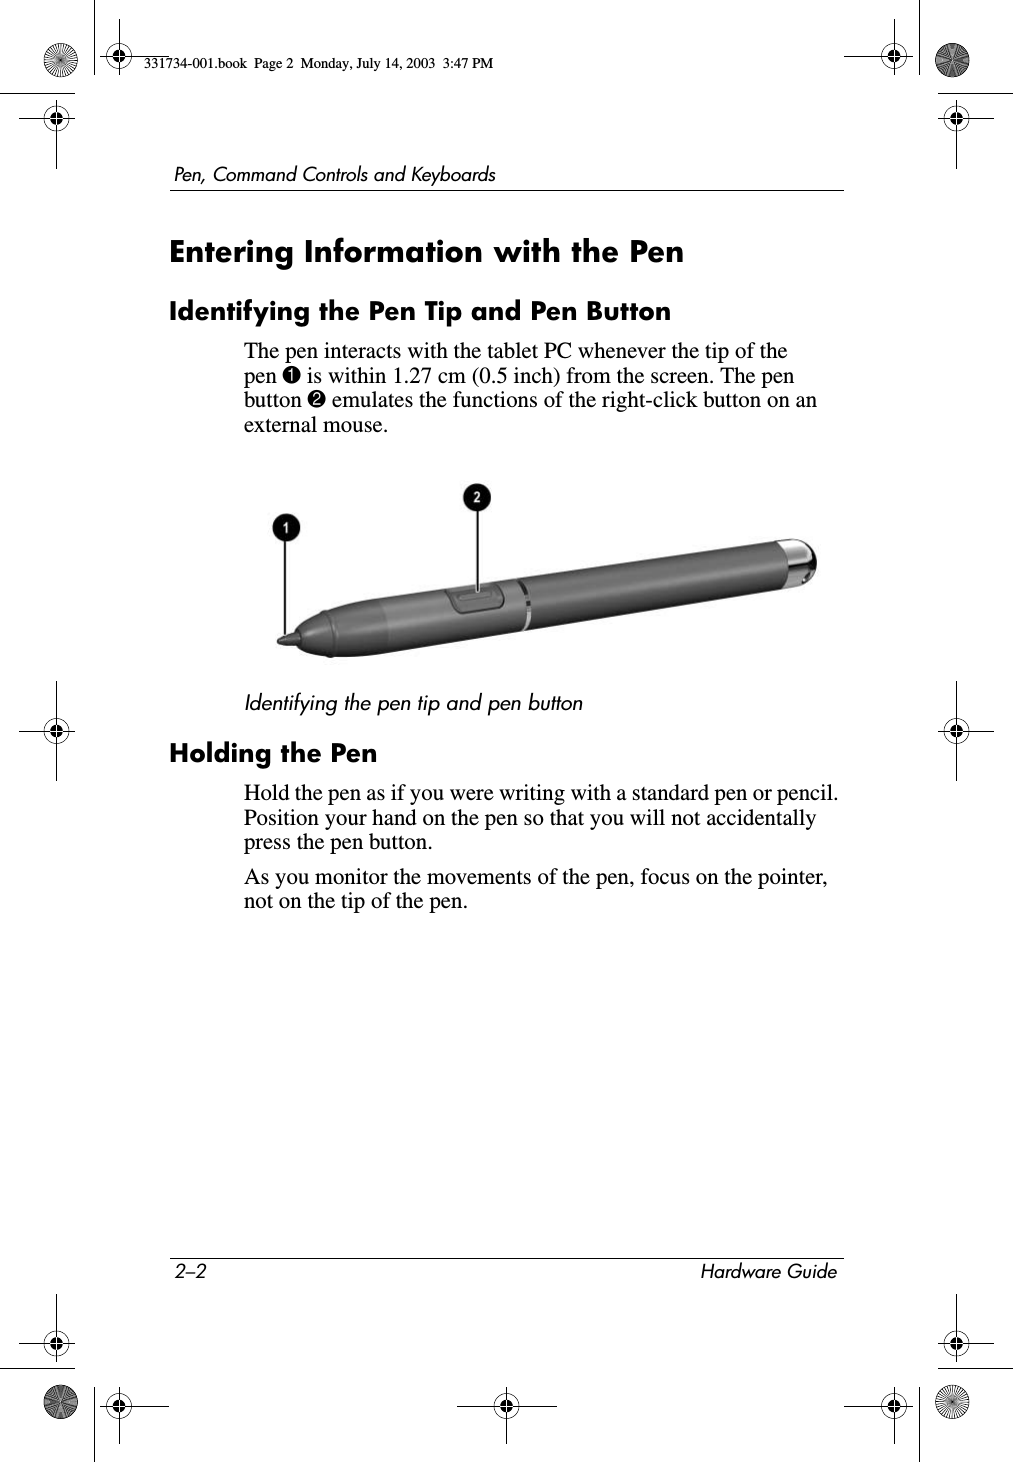 2–2 Hardware GuidePen, Command Controls and KeyboardsEntering Information with the PenIdentifying the Pen Tip and Pen ButtonThe pen interacts with the tablet PC whenever the tip of the pen 1 is within 1.27 cm (0.5 inch) from the screen. The pen button 2 emulates the functions of the right-click button on an external mouse.Identifying the pen tip and pen buttonHolding the PenHold the pen as if you were writing with a standard pen or pencil. Position your hand on the pen so that you will not accidentally press the pen button.As you monitor the movements of the pen, focus on the pointer, not on the tip of the pen.331734-001.book  Page 2  Monday, July 14, 2003  3:47 PM